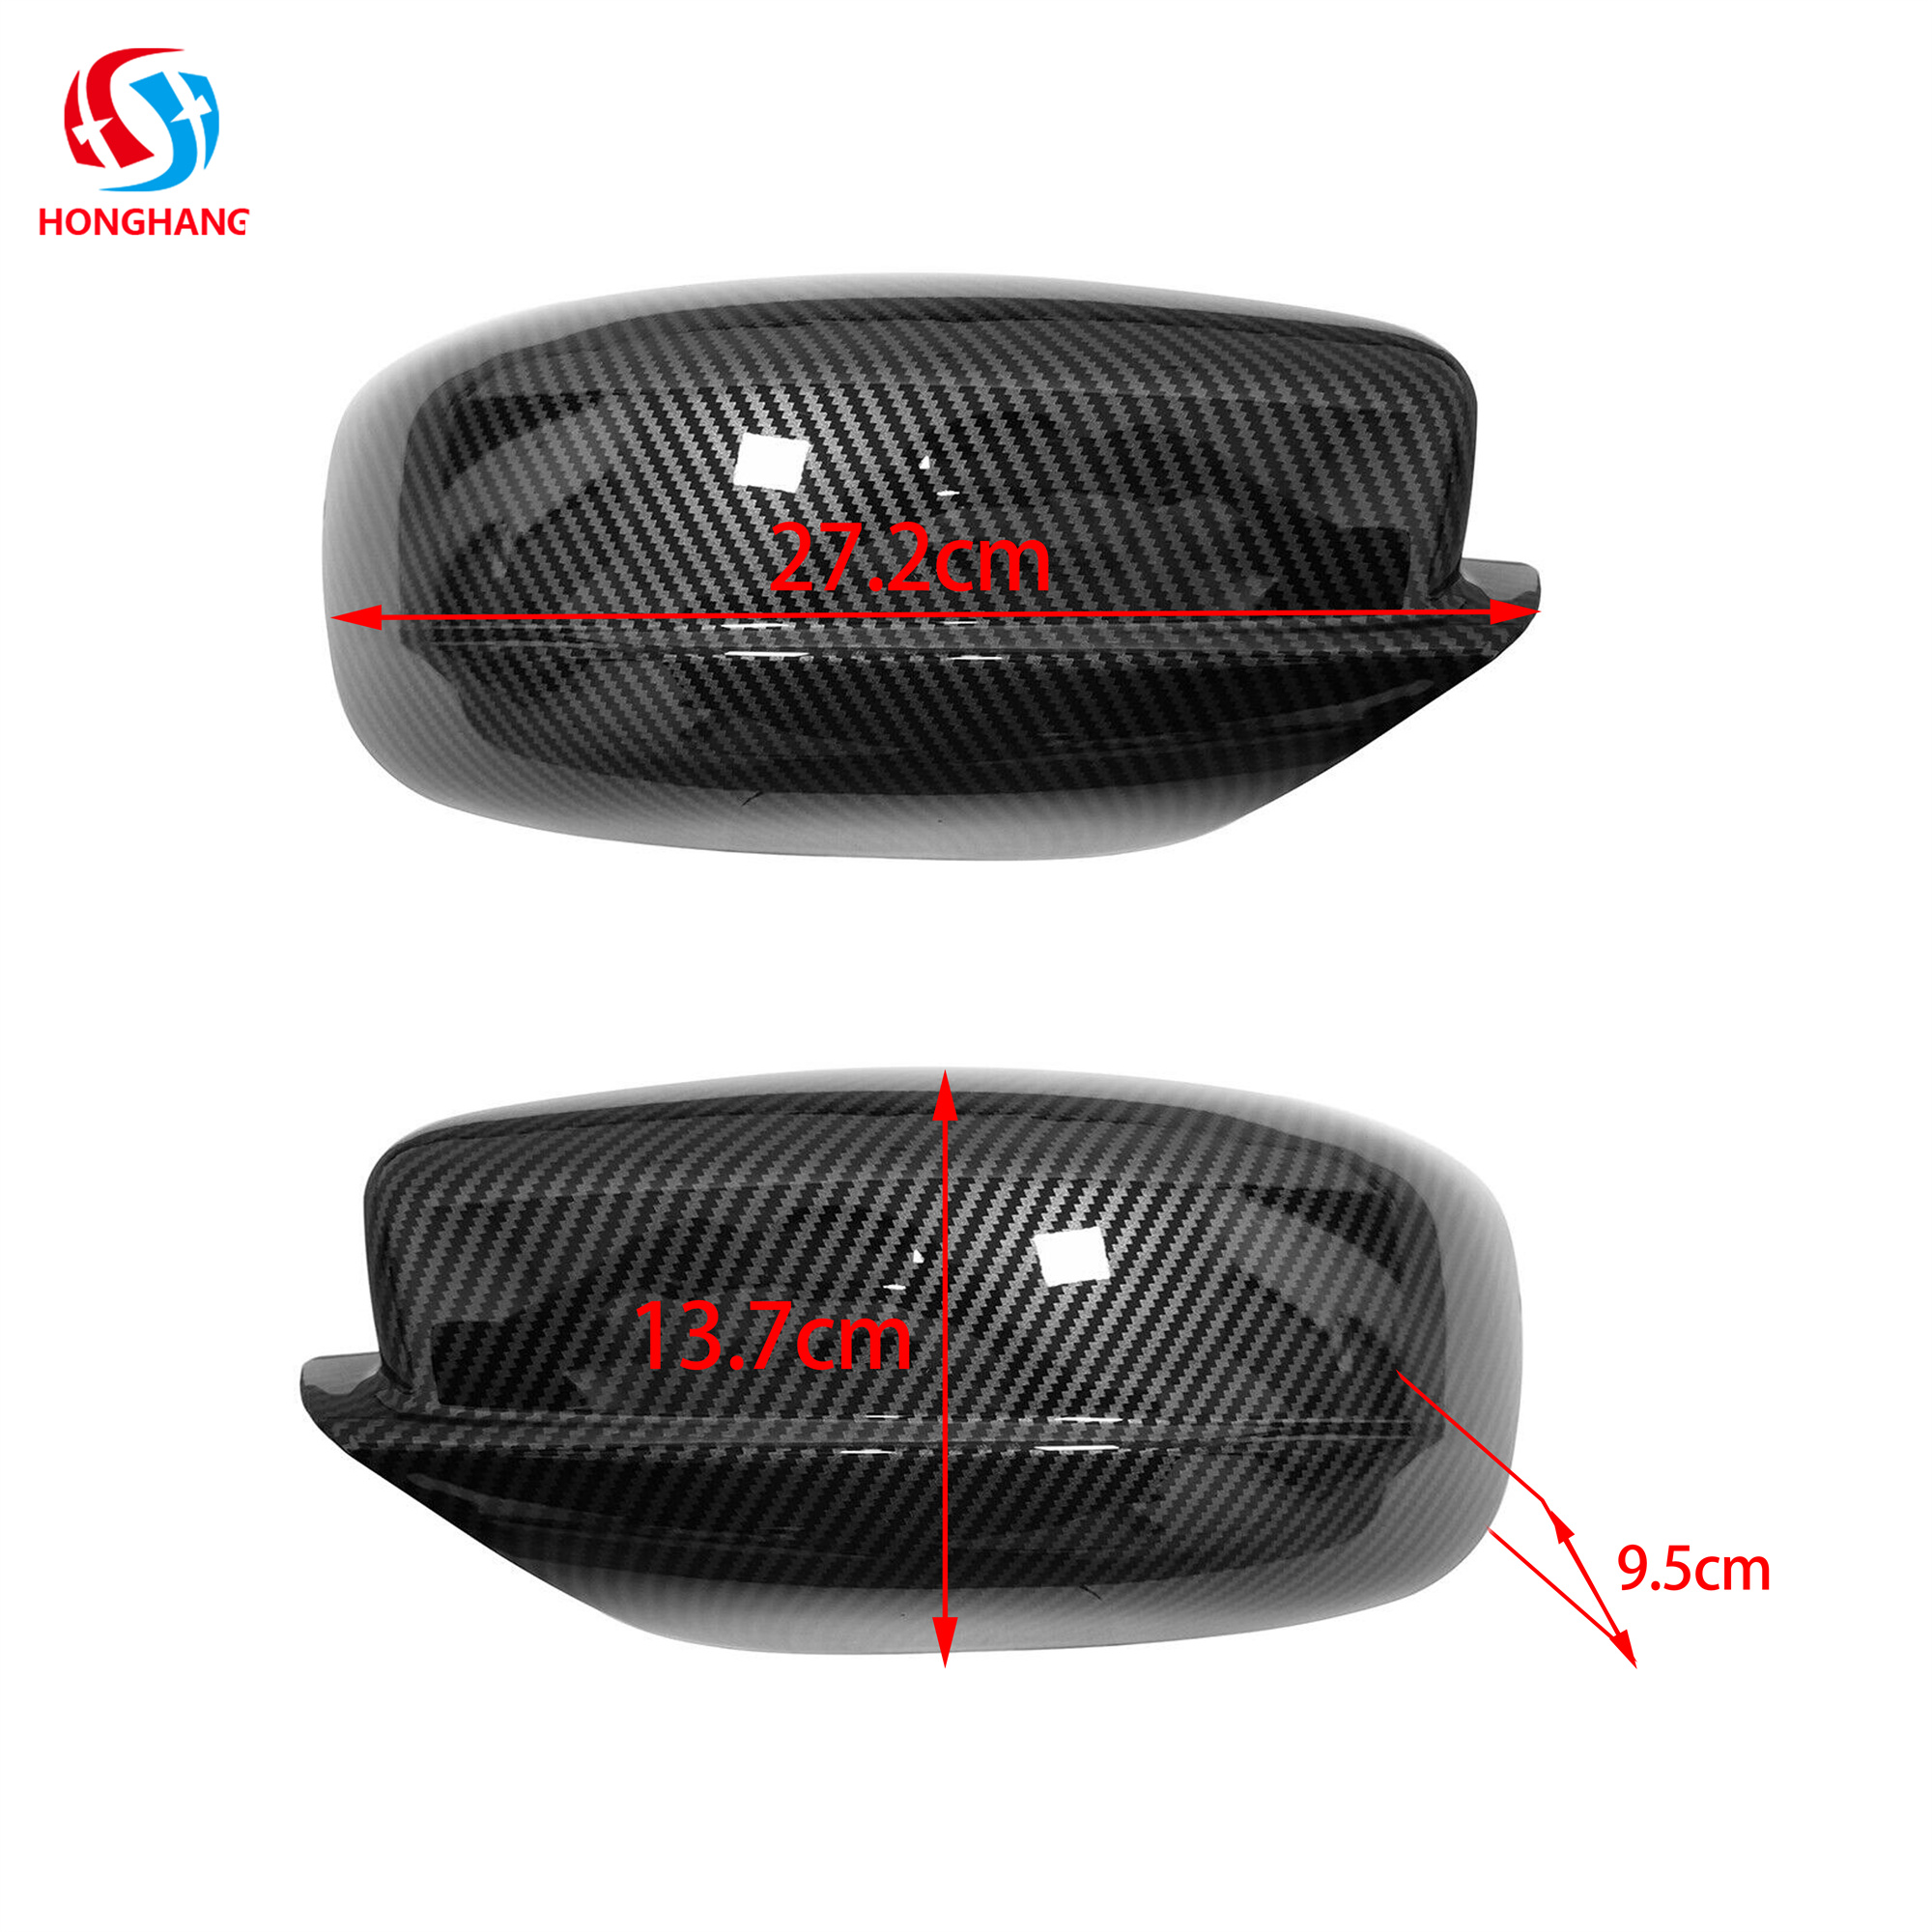 Auto Parts Side Mirror Cover Caps for Dodge Charger